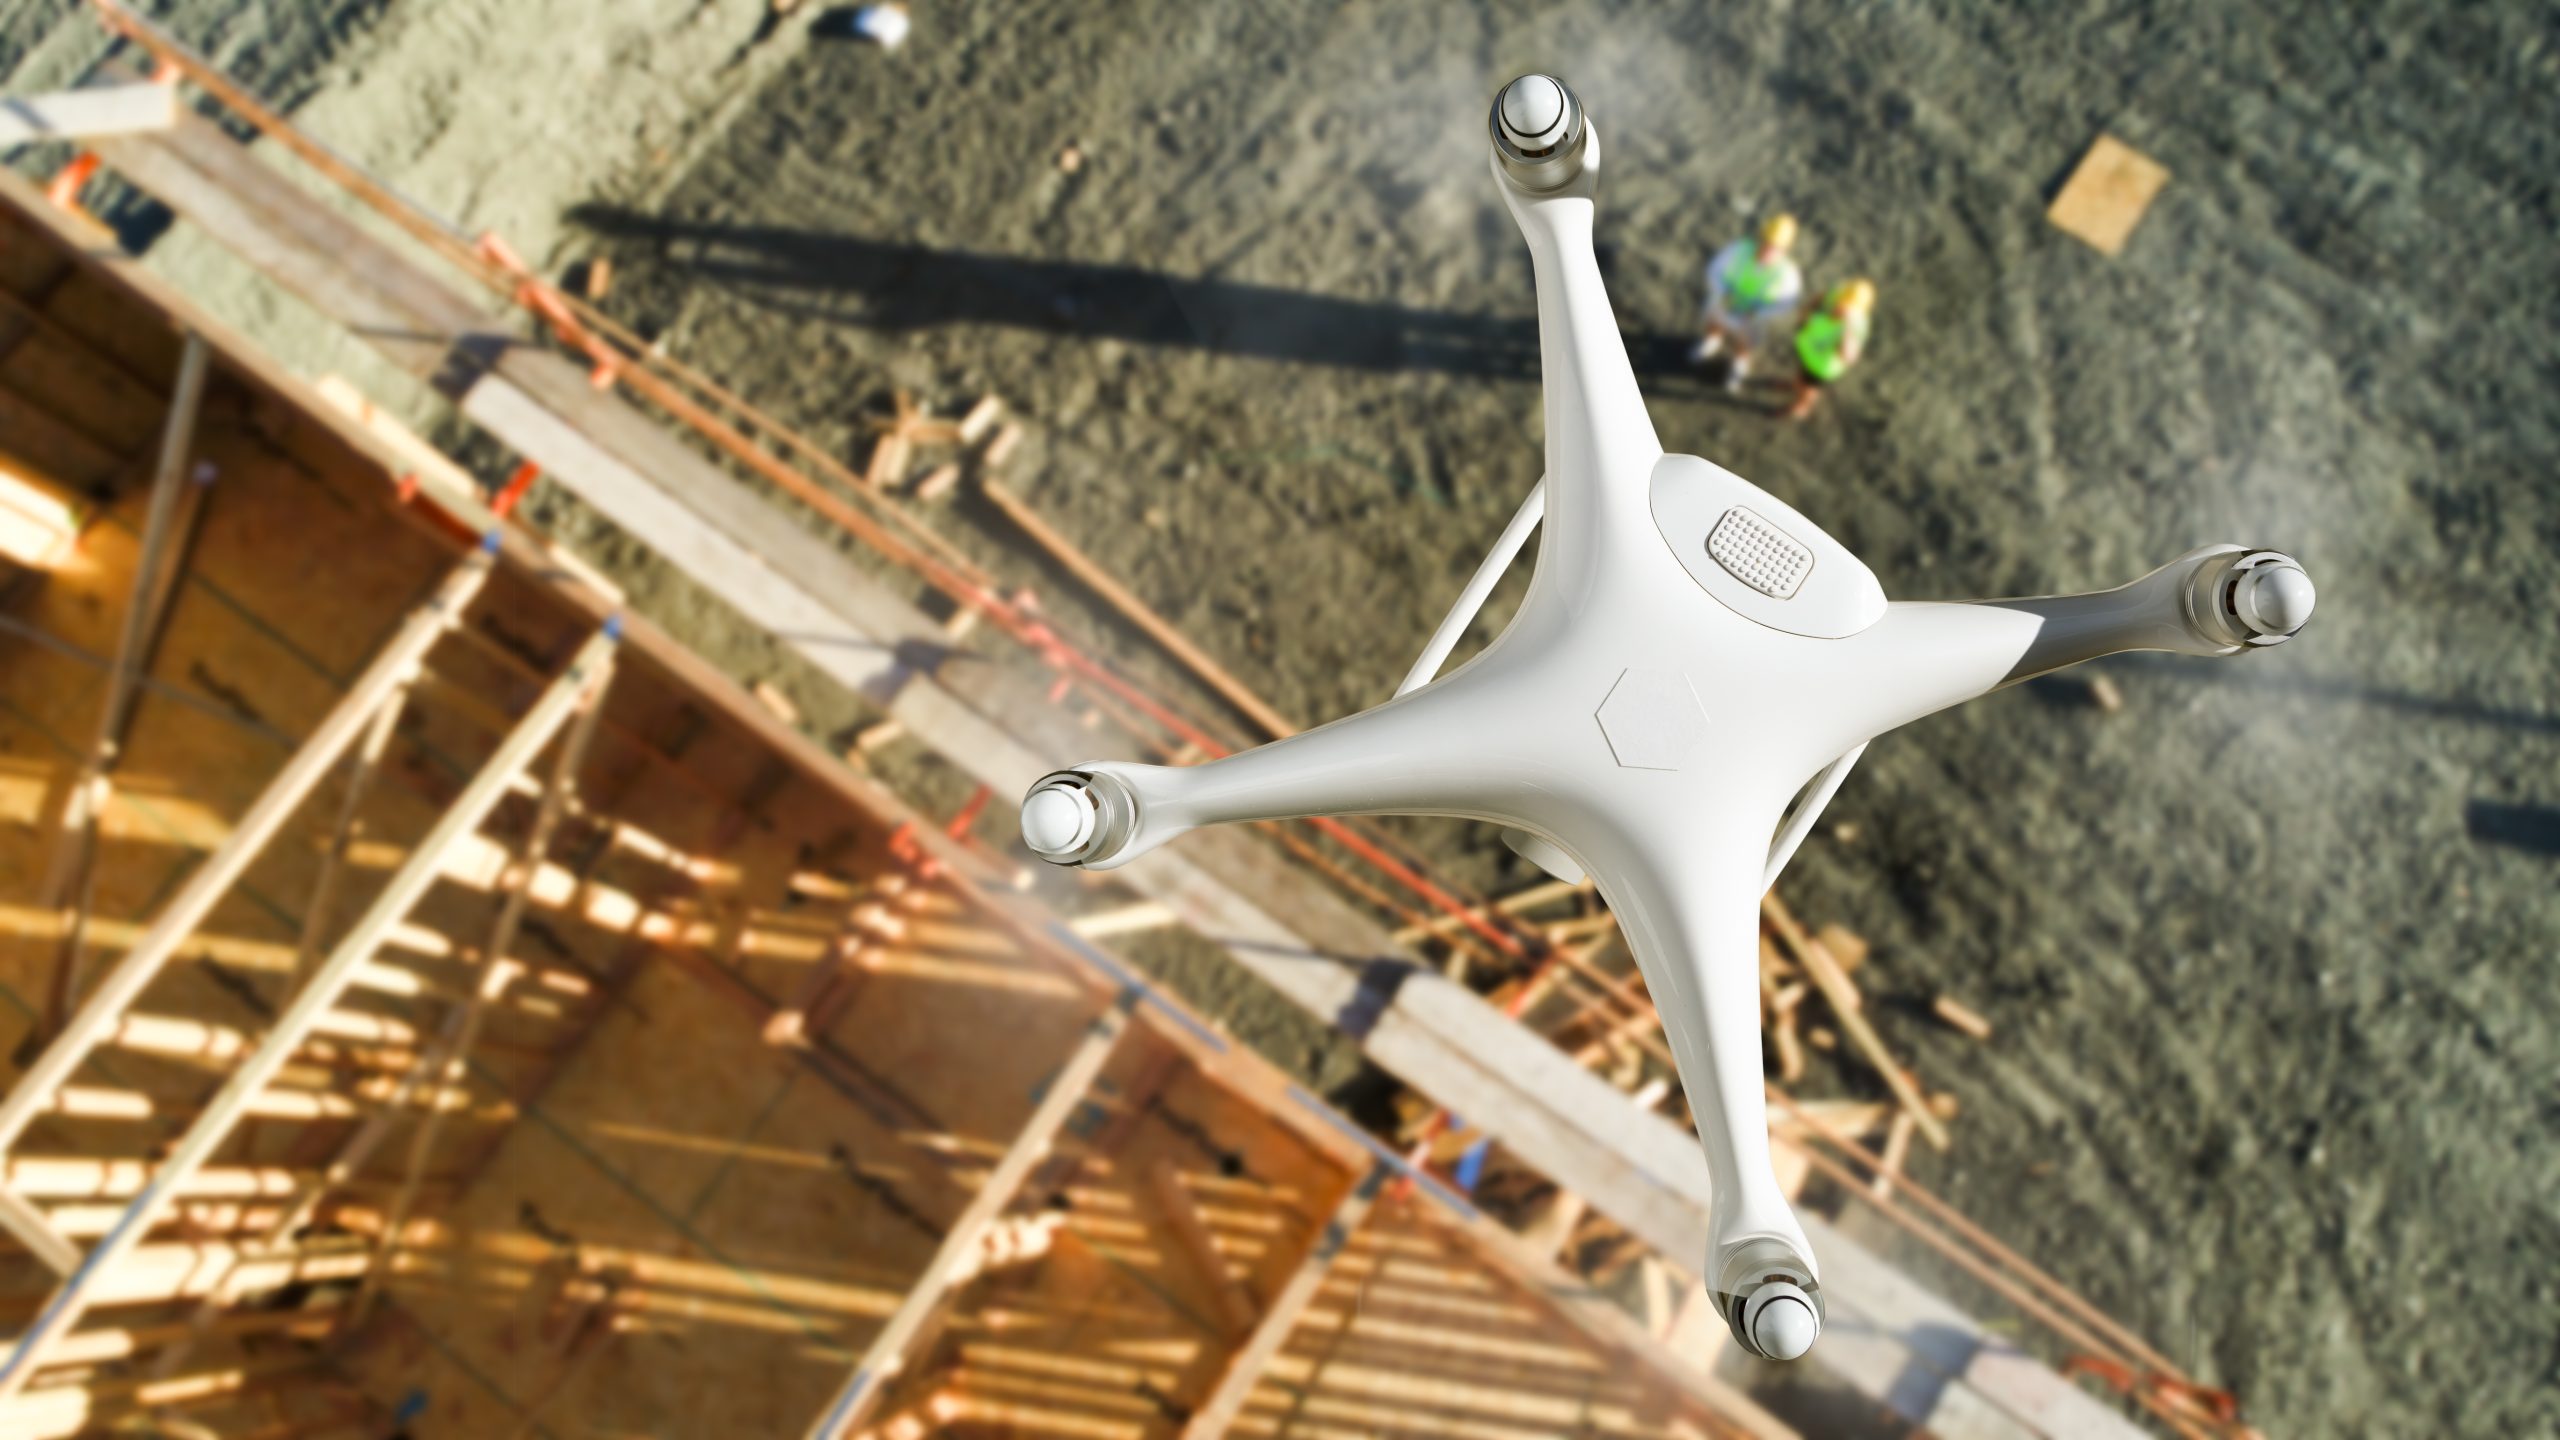 Unmanned Aircraft System Uav Quadcopter Drone Air Construction Site Scaled